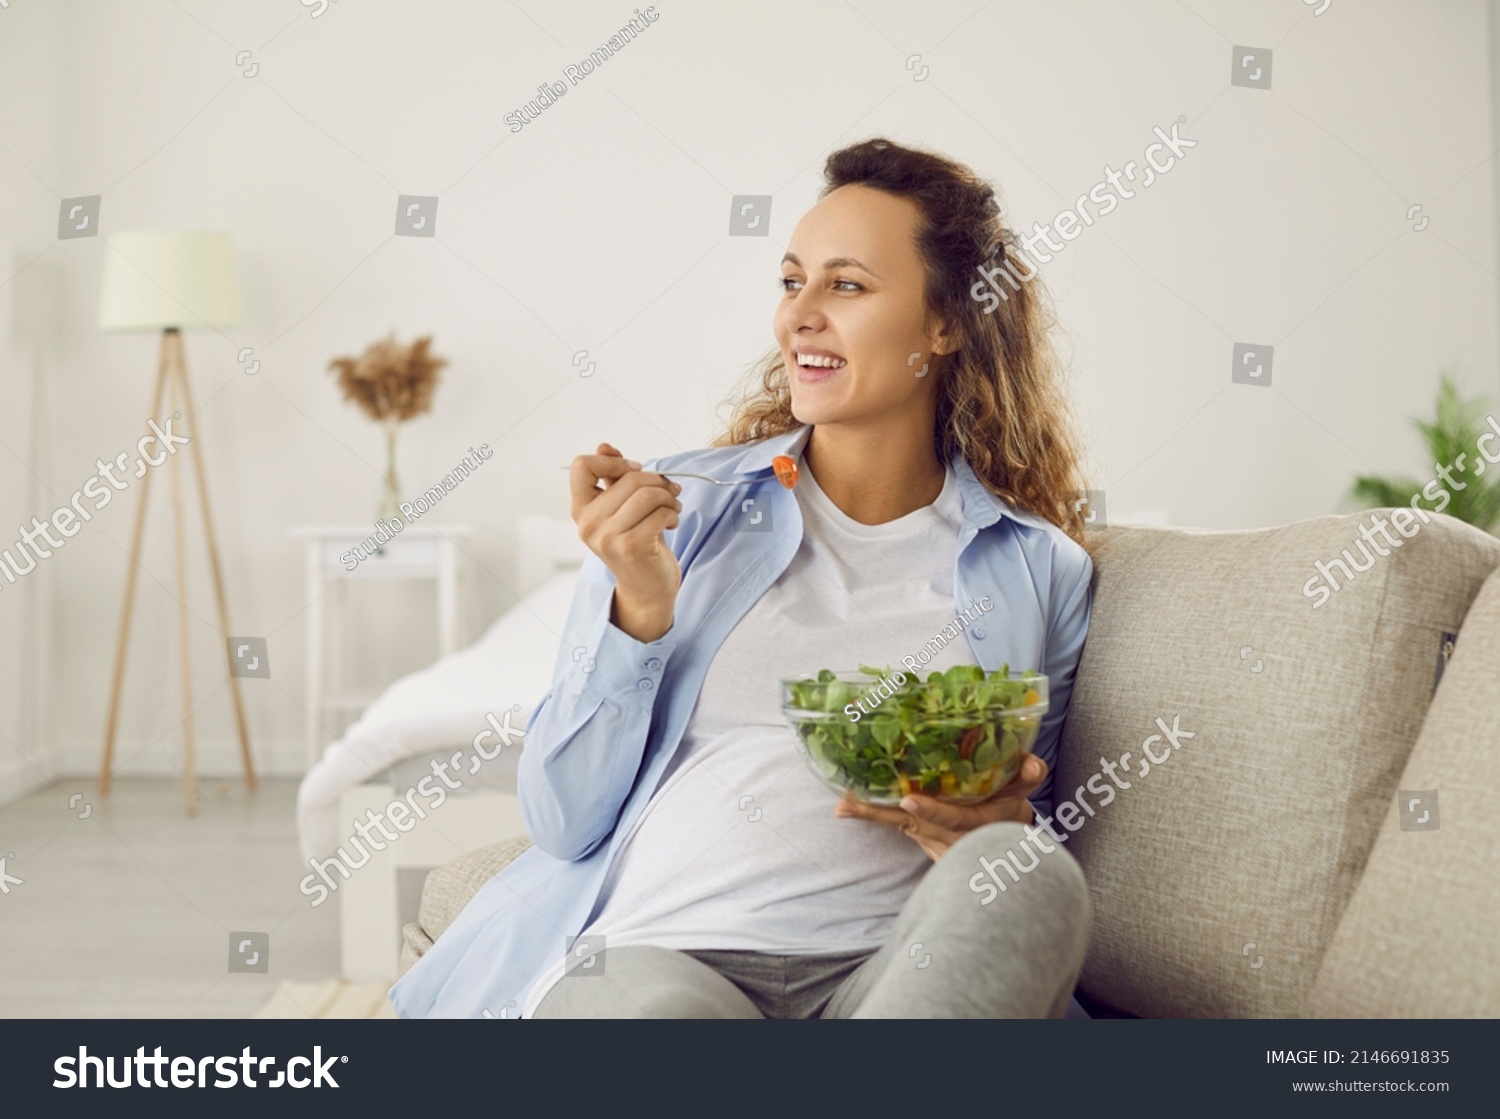 Pregnant woman who eats many different vegetables during pregnancy enjoys fresh green salad at home. Happy woman eating salad for breakfast sitting on sofa in living room. Concept of healthy pregnancy #2146691835